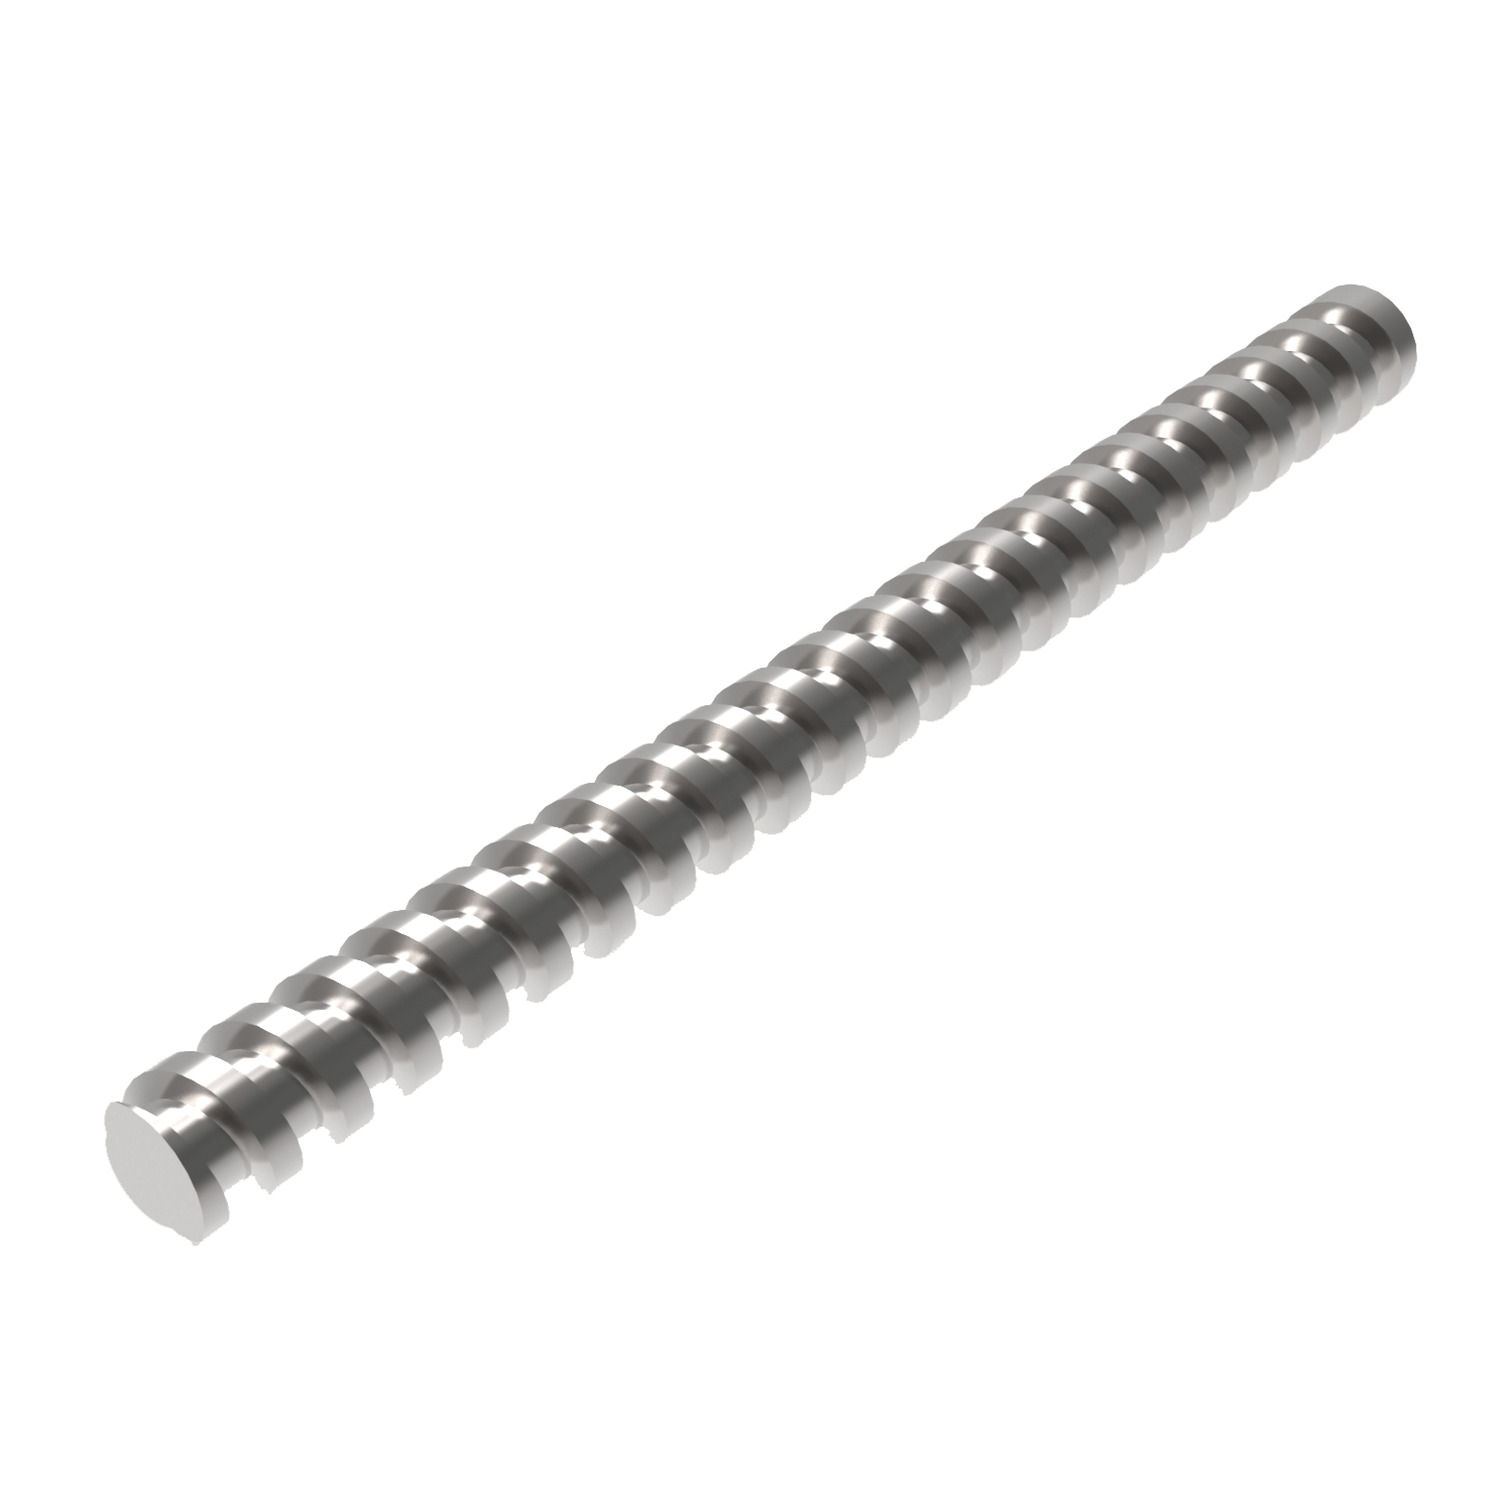 Miniature Rolled Ball Screws & Nuts 